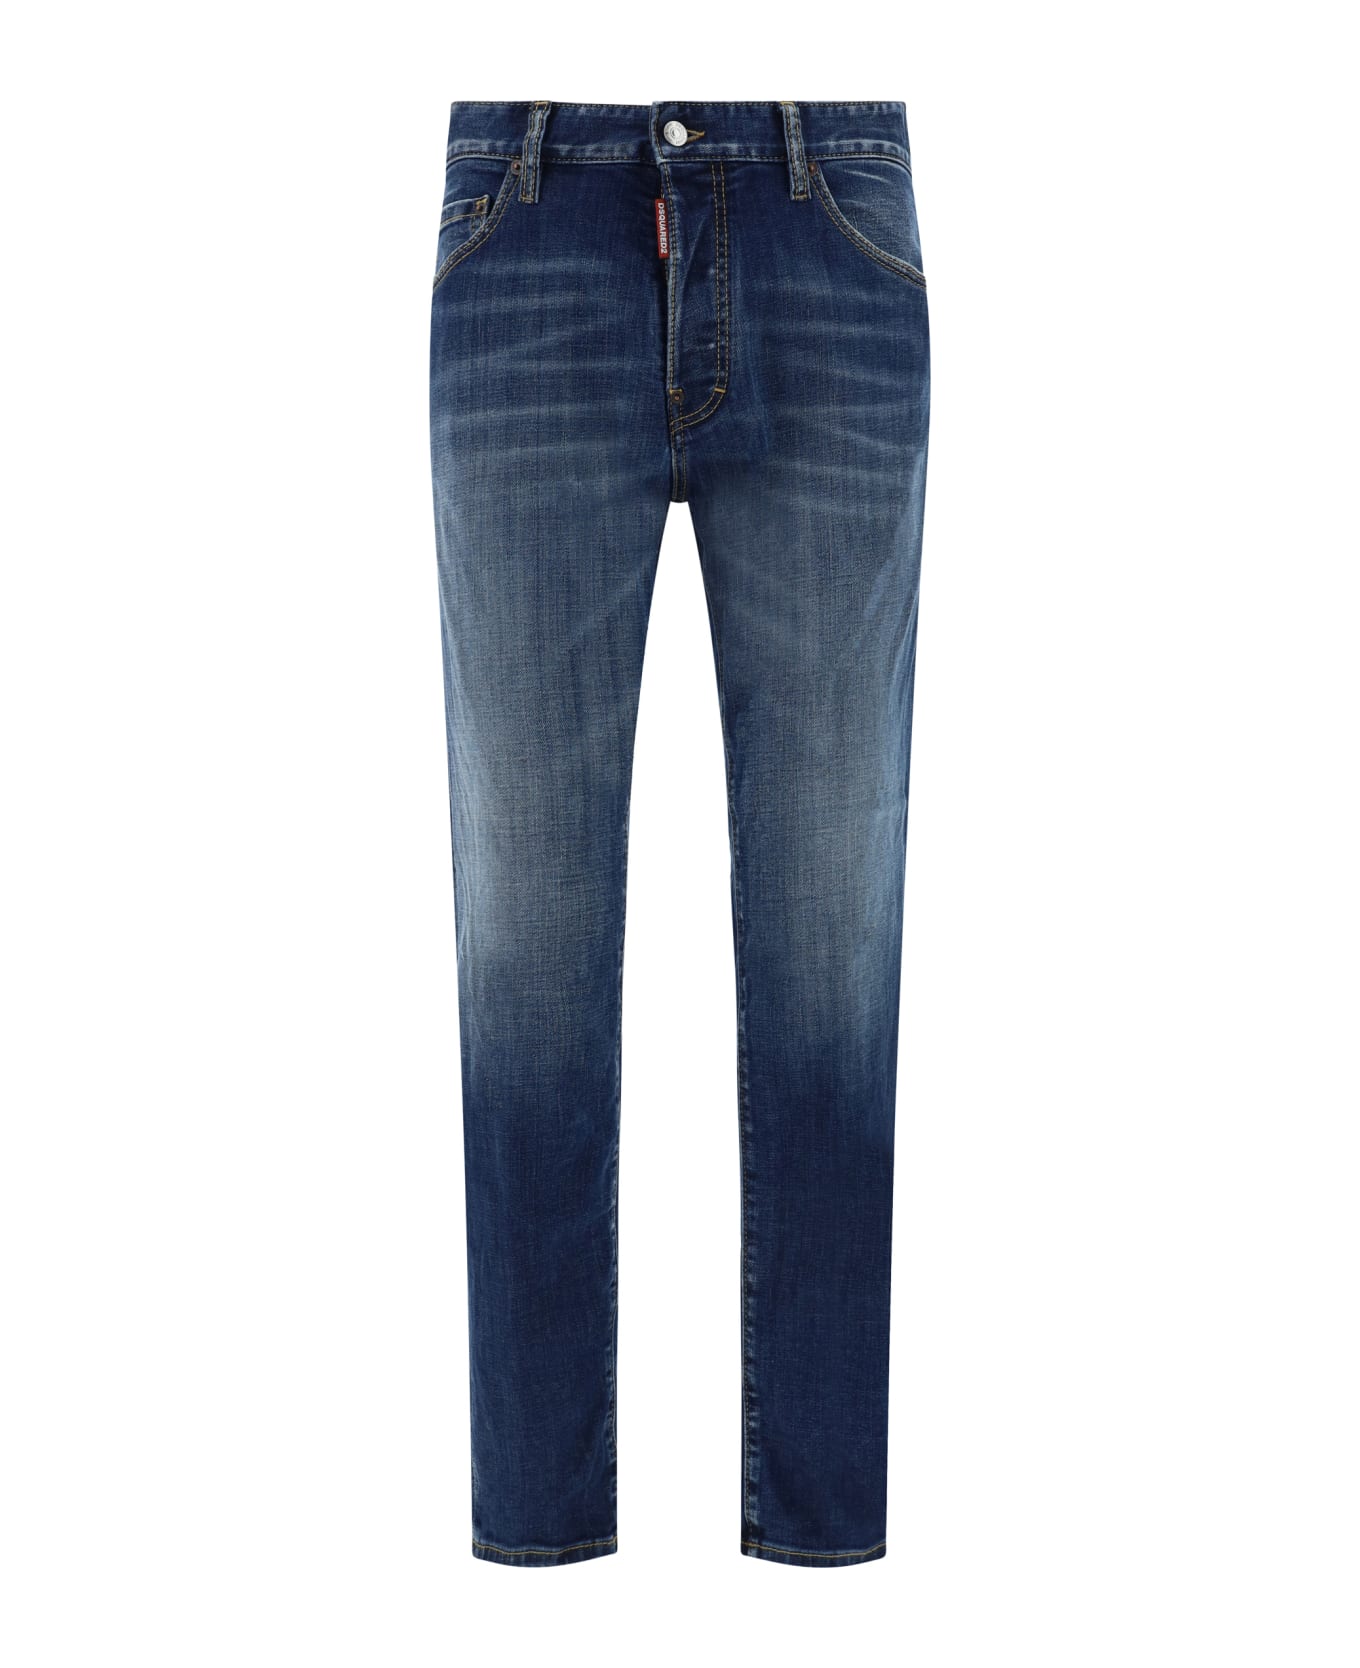 Dsquared2 'cool Guy' Jeans - Navy Blue